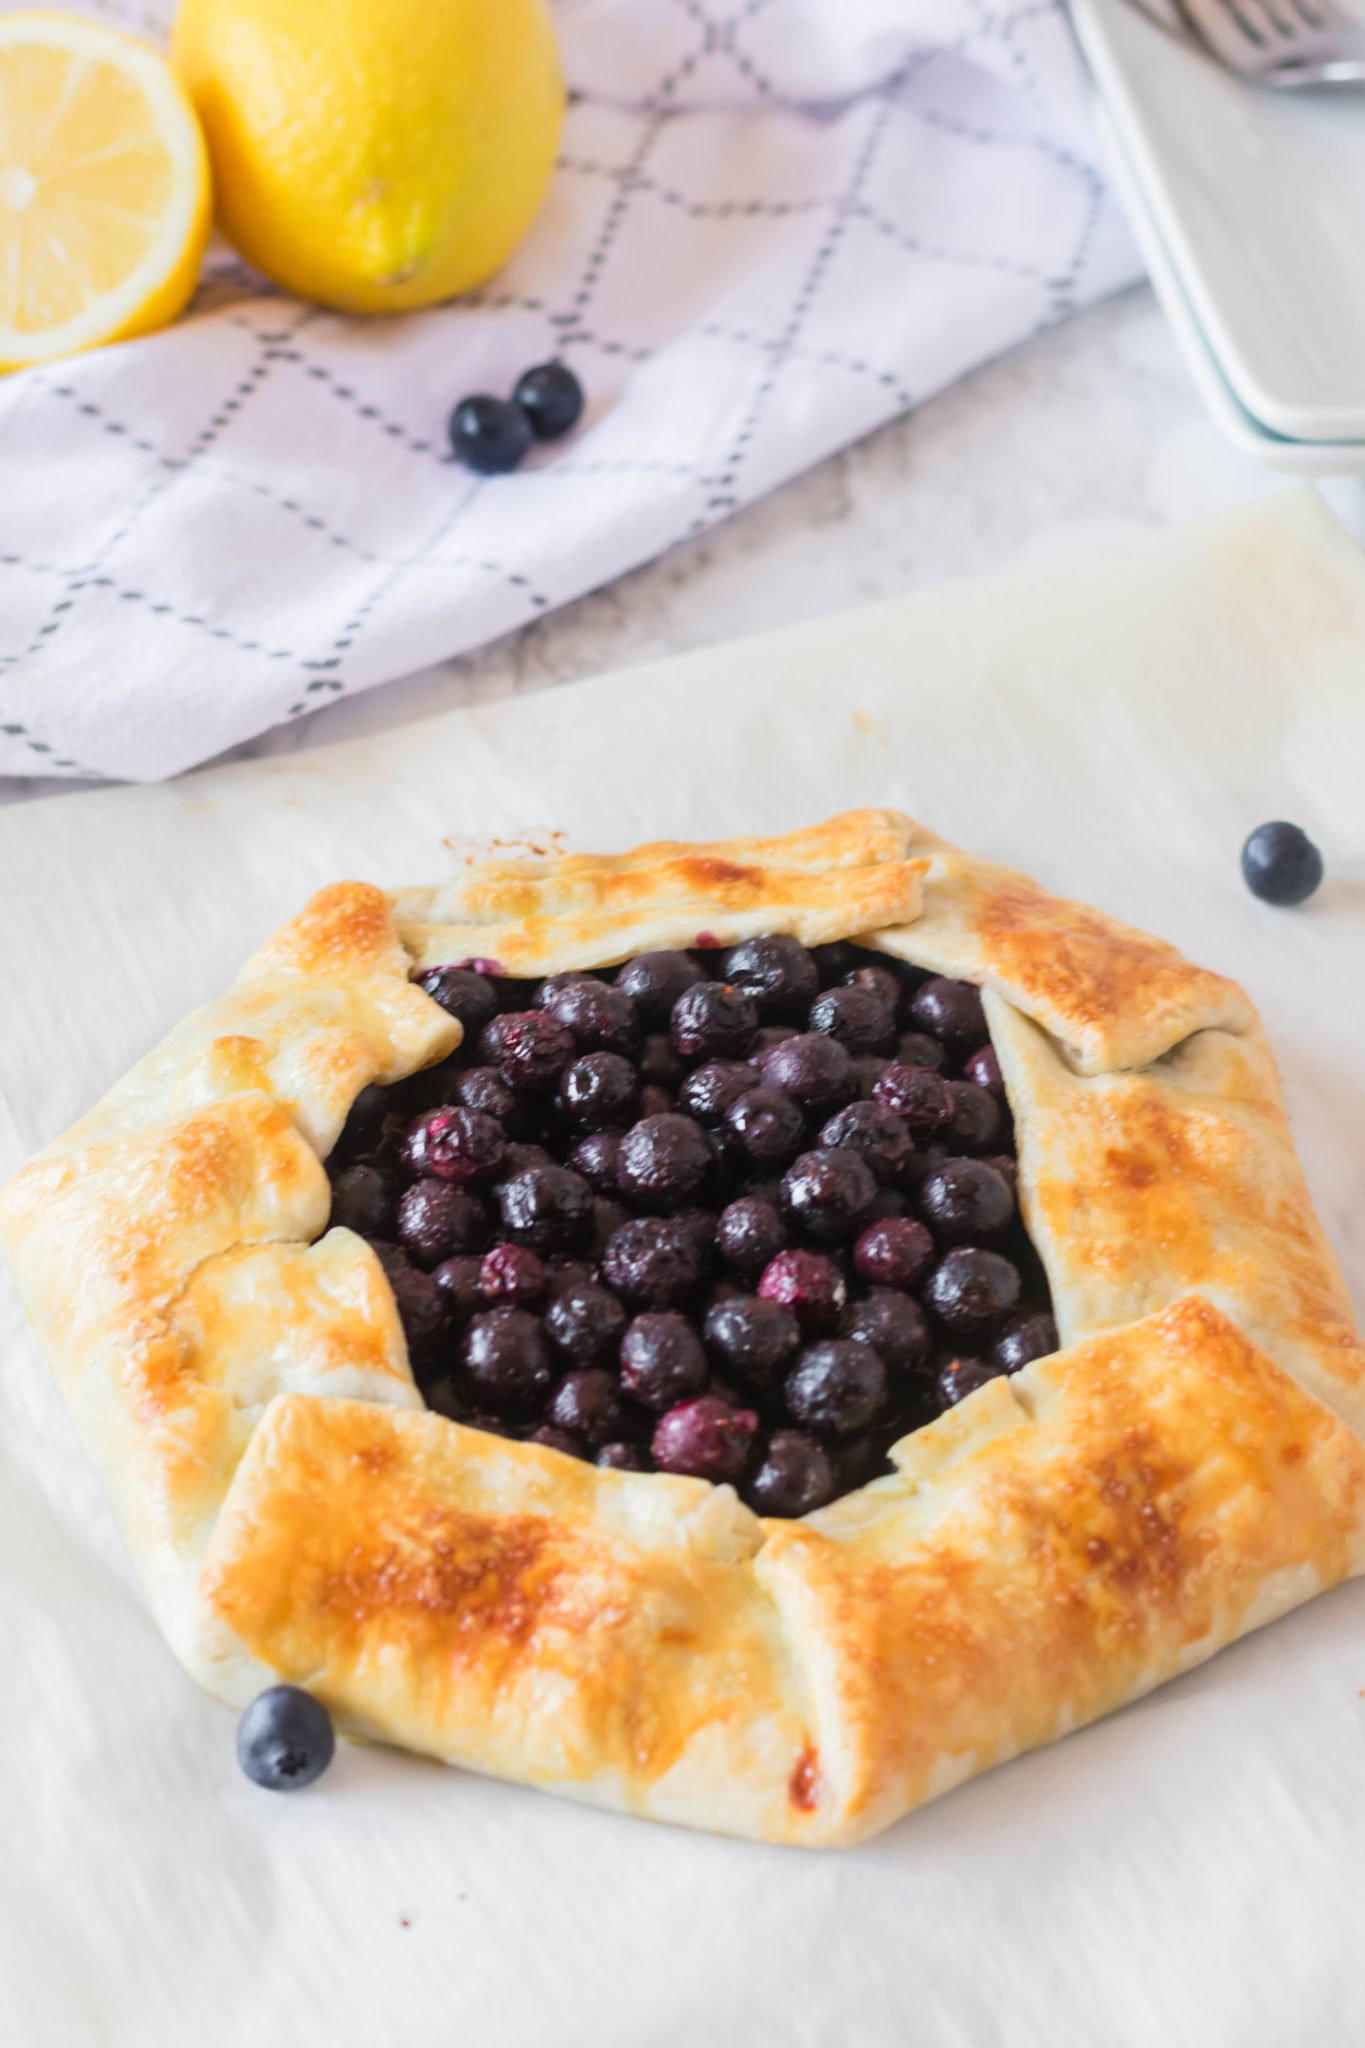 A rustic blueberry tart full of fresh berries wrapped in a pie crust.